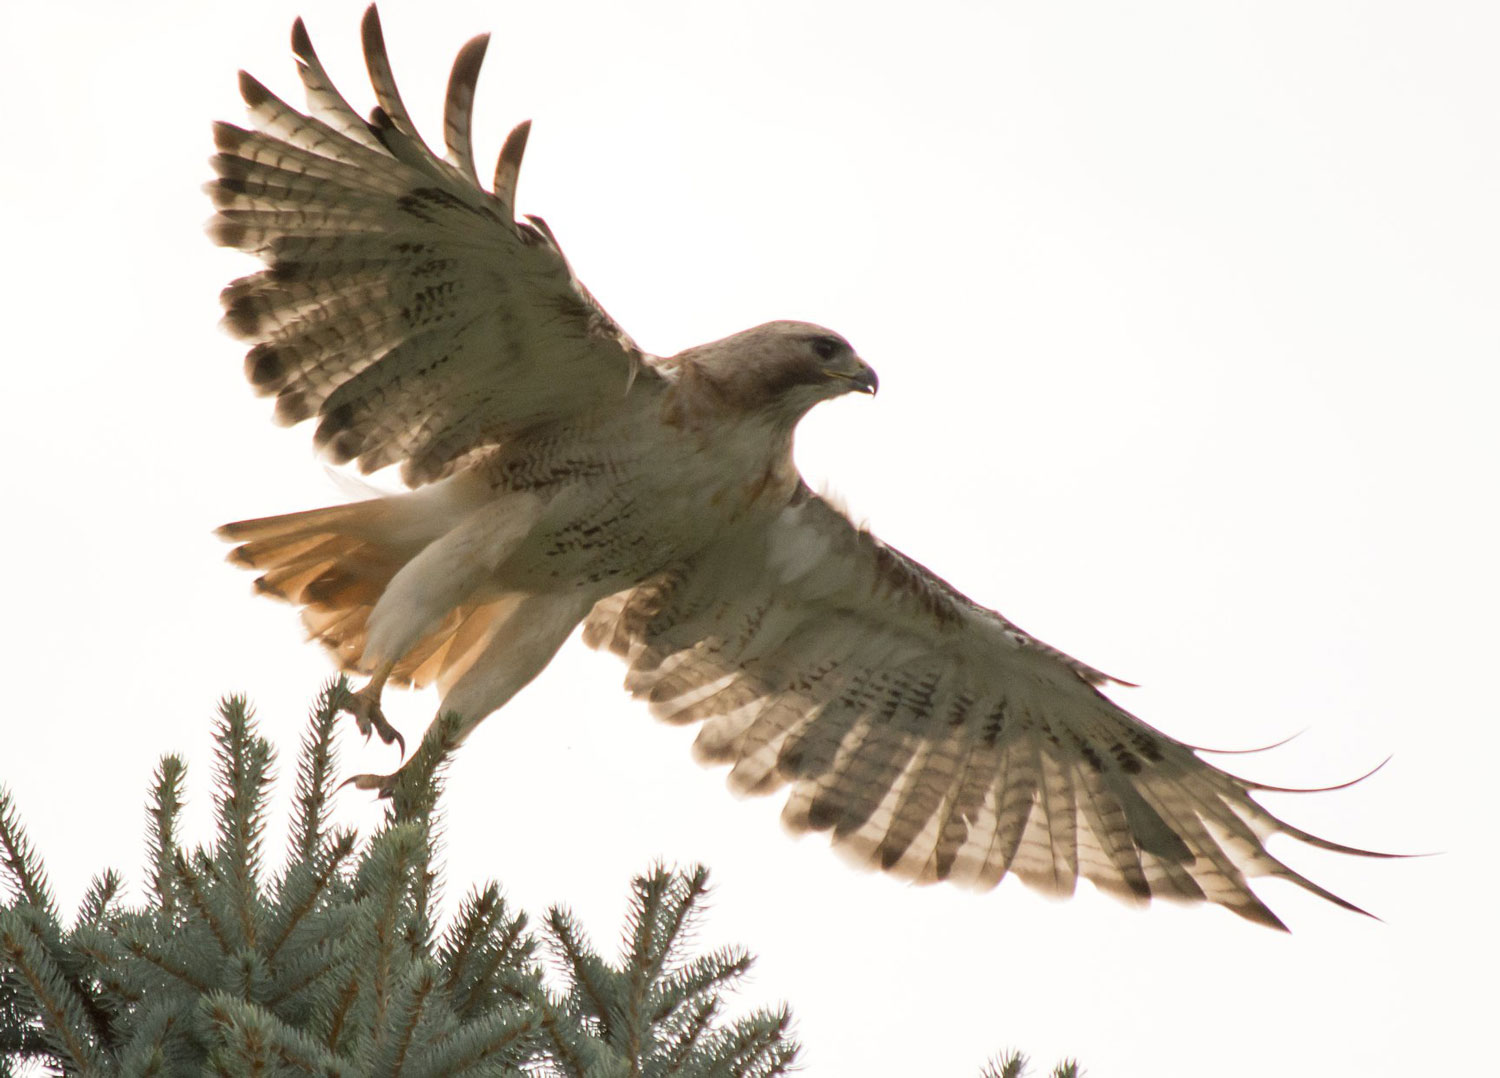 A red-tailed hawk taking off from a shrub